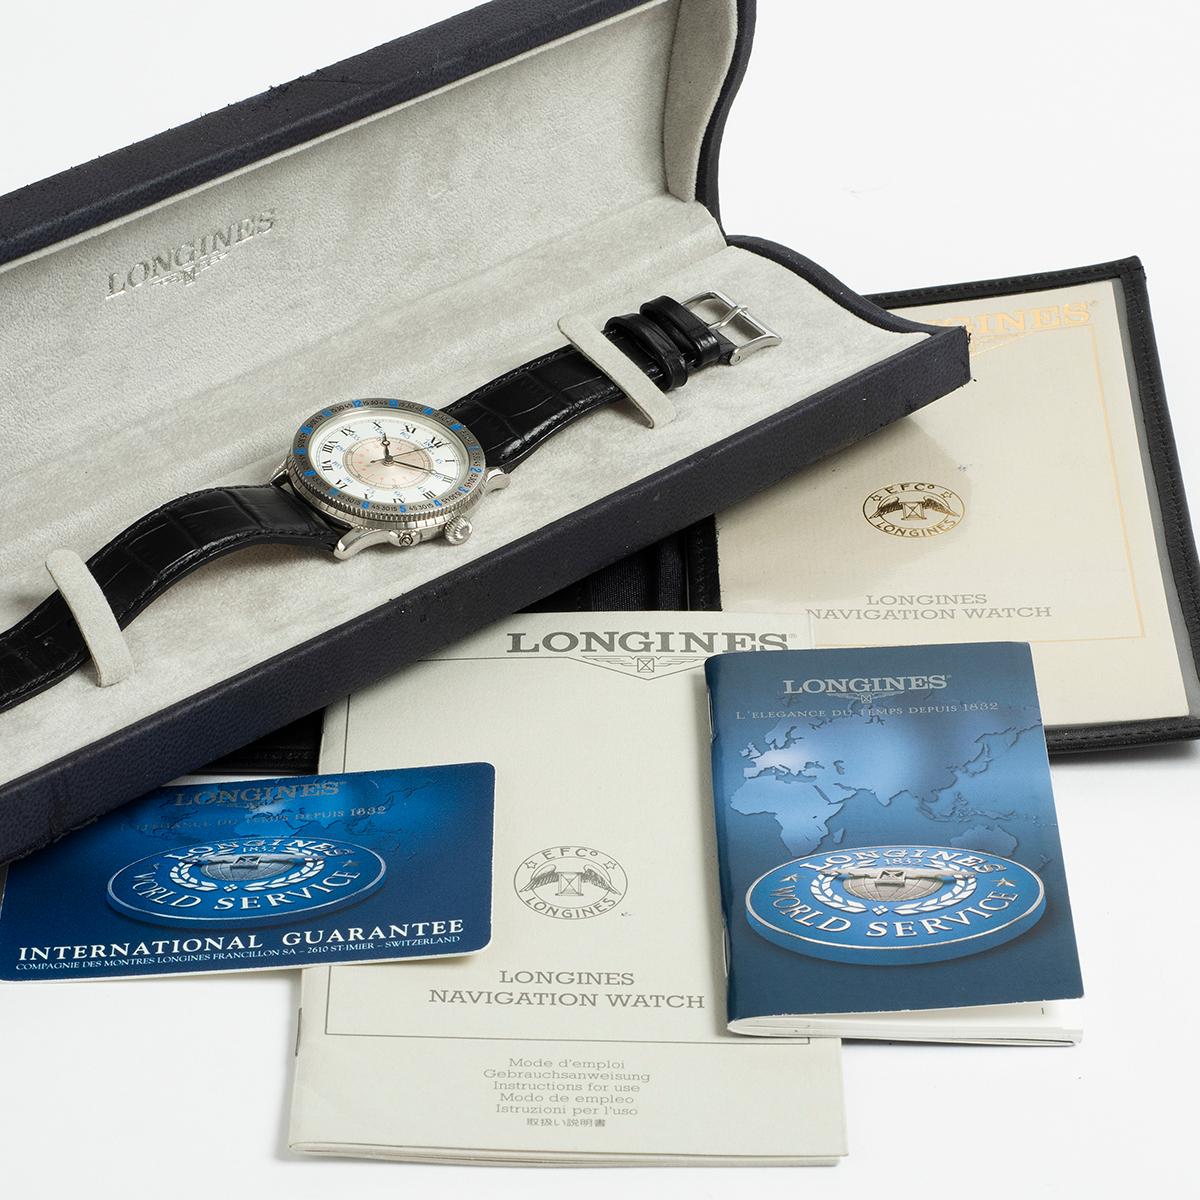 Our rare Longines Lindbergh Hour Angle L2.601.4.11.2 features a 38mm stainless steel case with opening case back with inner exhibition sapphire glass, and is presented in outstanding condition with only light signs of use from new. An attractive